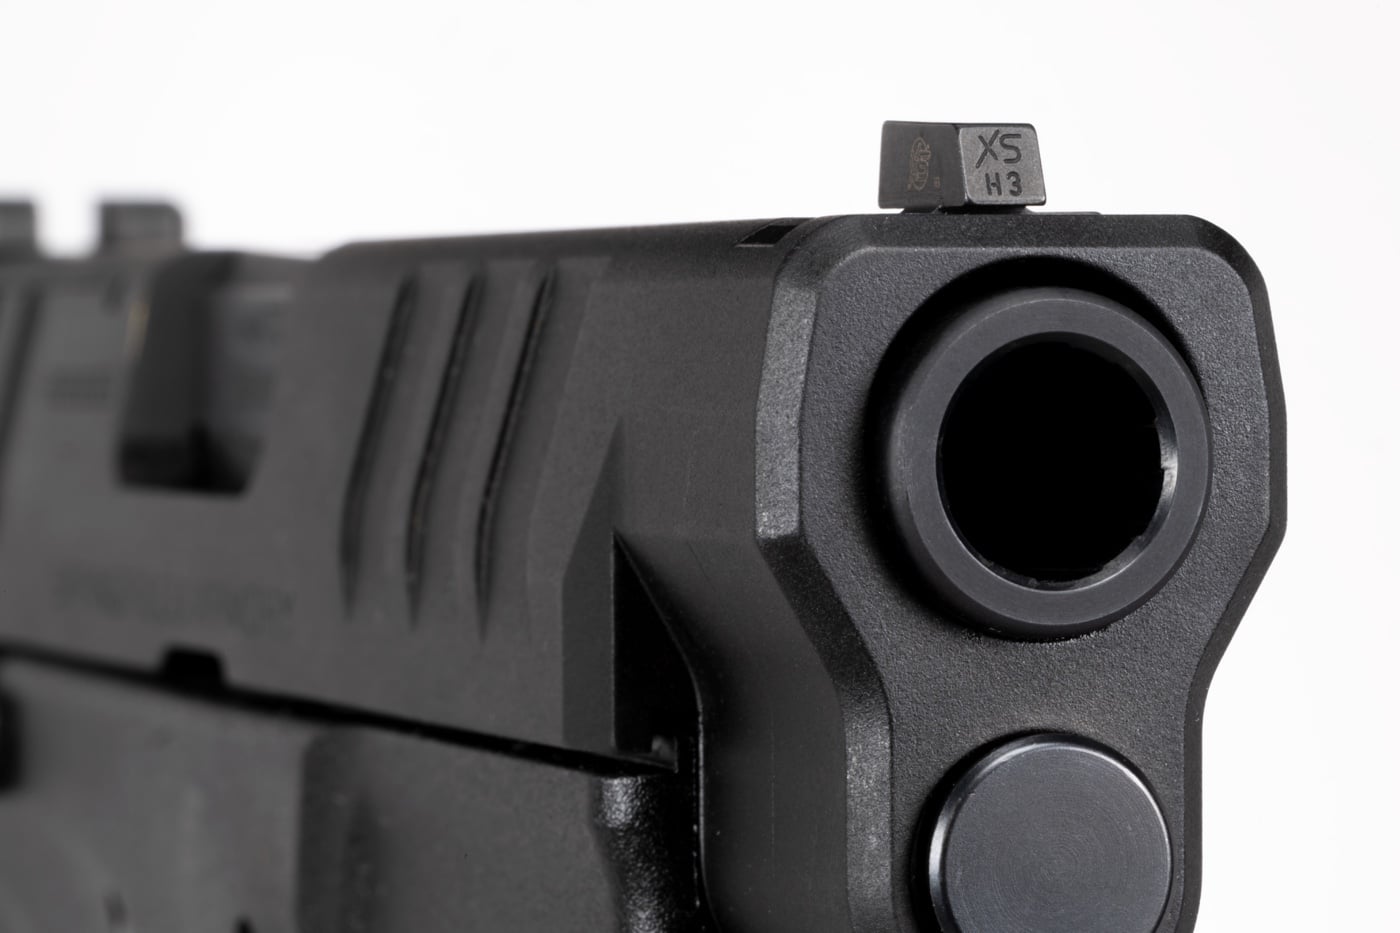 In this review, the author installs a set of R3D 2.0 sights from XS Sights on his Springfield XD-M 10mm pistol. Shown is the front sight that combines a tritium vial with a photoluminescent ring. The R3D sights are great in day or night conditions for concealed carry on any firearm.